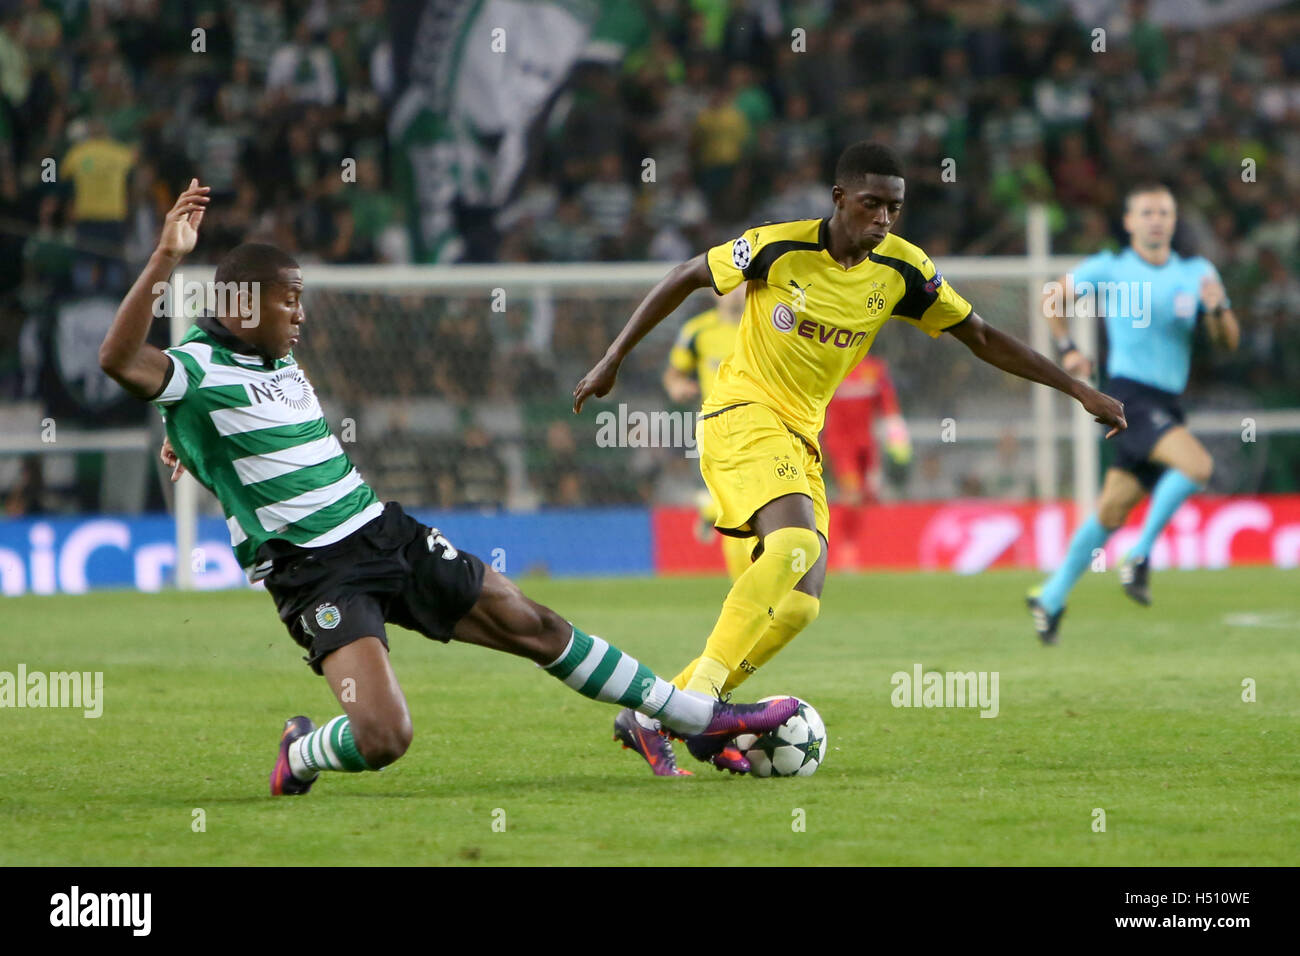 Lisbon, Portugal. 18th Oct, 2016. Sporting's defender Marvin Zeegelaar (L) vies with Dortmund's forward Ousmane Dembele during the UEFA Champions League Group F football match Sporting CP vs Borussia Dortmund at the Alvalade stadium in Lisbon, Portugal on October 18, 2016. Photo: Pedro Fiuza Credit:  Pedro Fiuza/ZUMA Wire/Alamy Live News Stock Photo